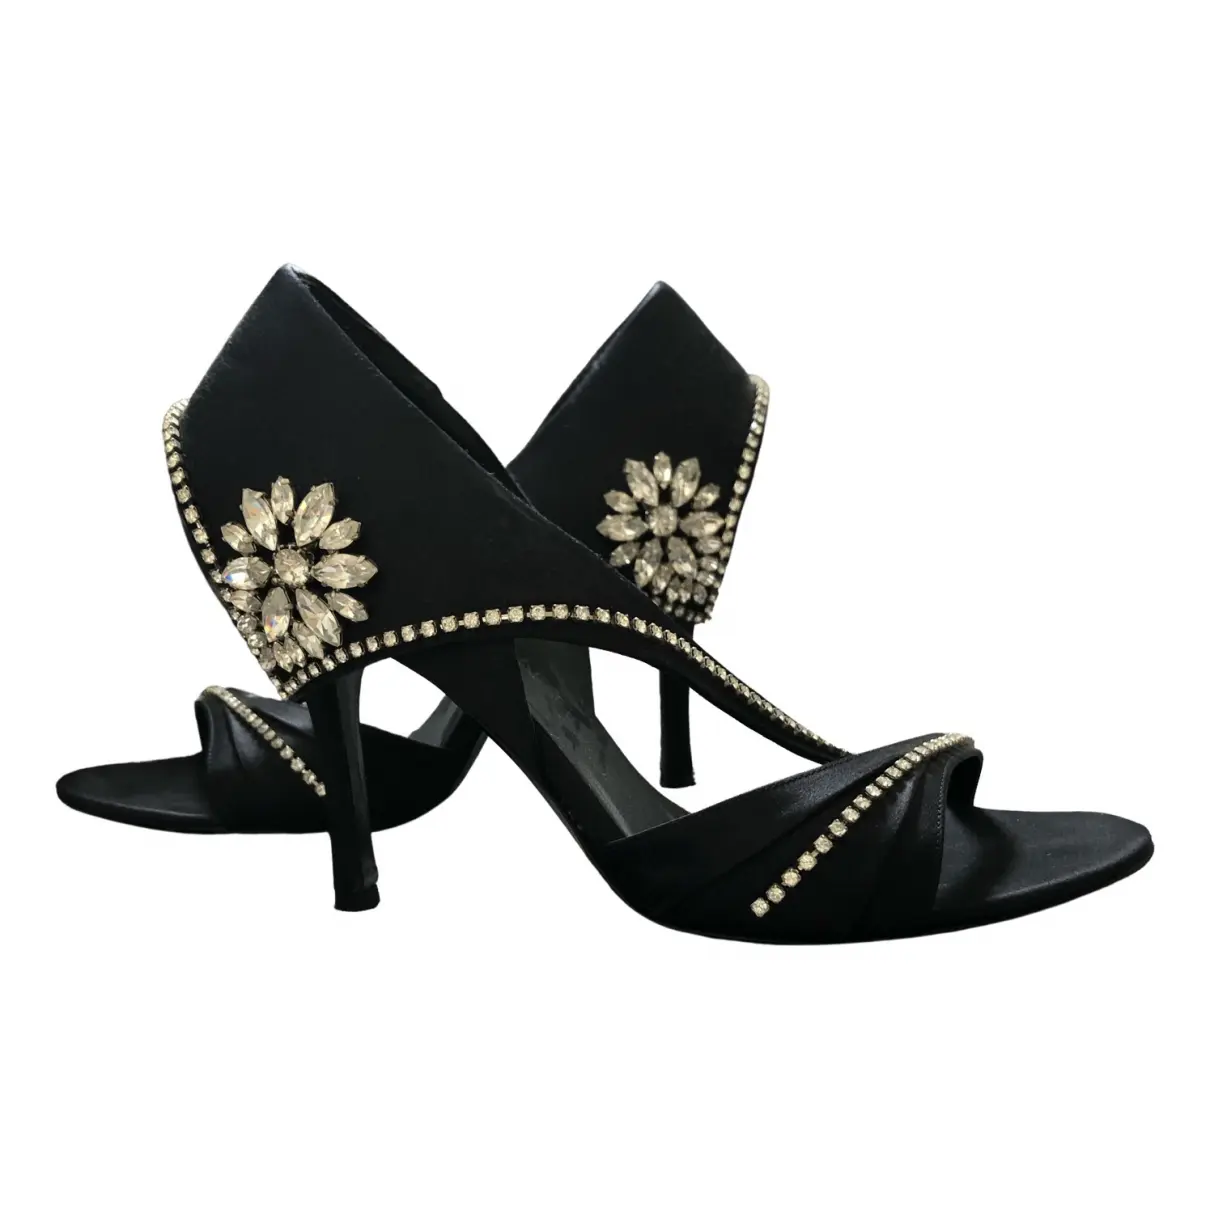 Night Out sandals Celine